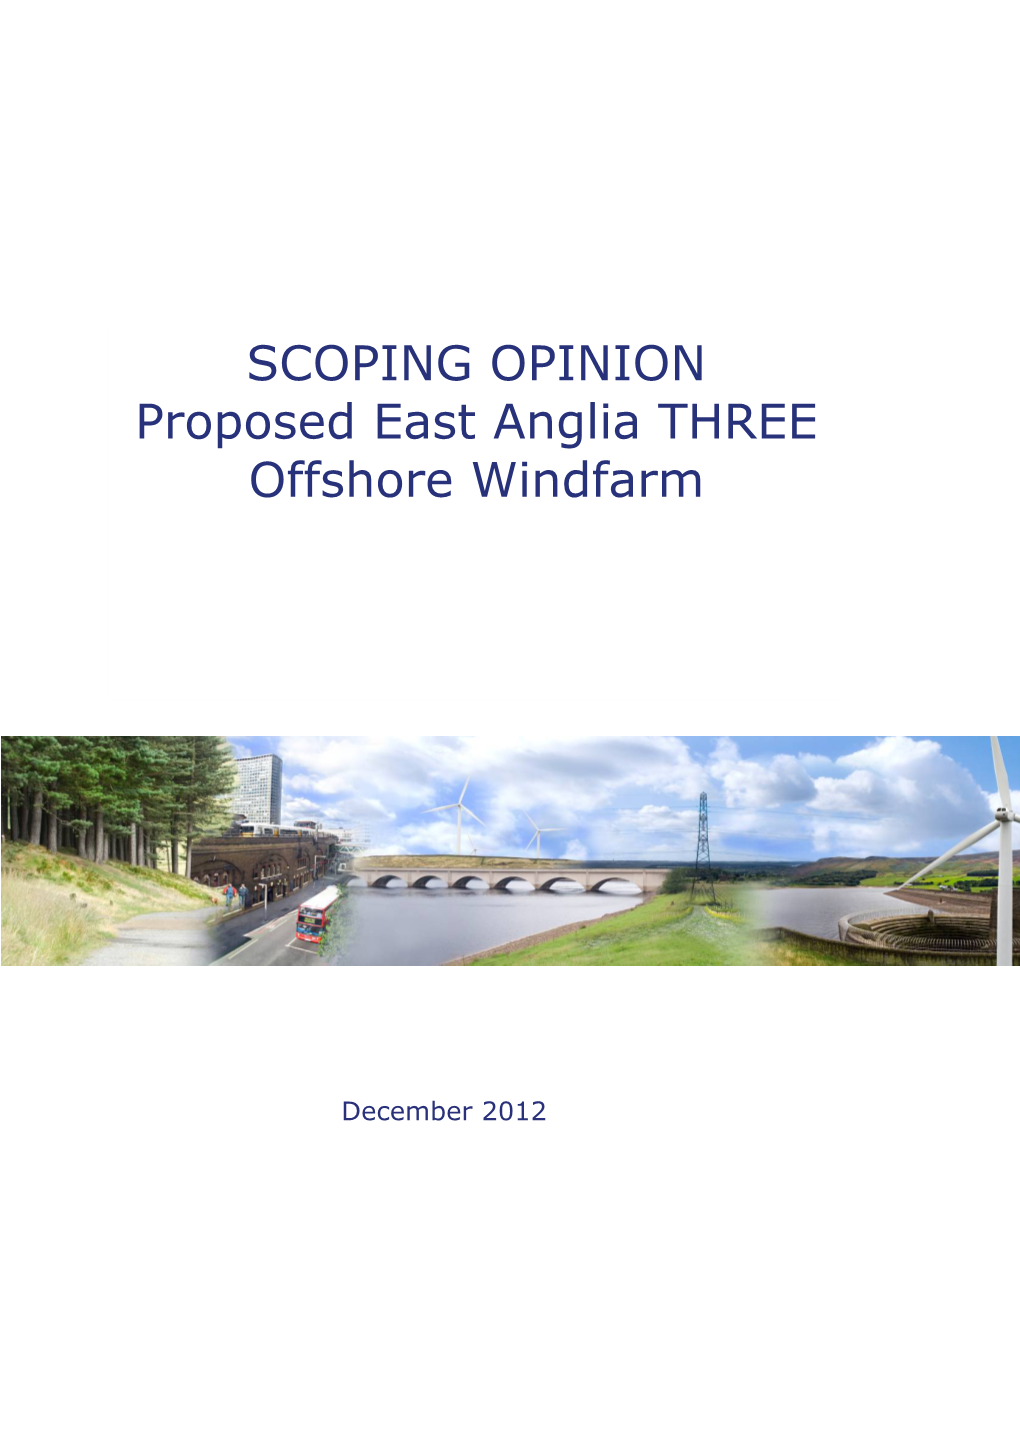 SCOPING OPINION Proposed East Anglia THREE Offshore Windfarm